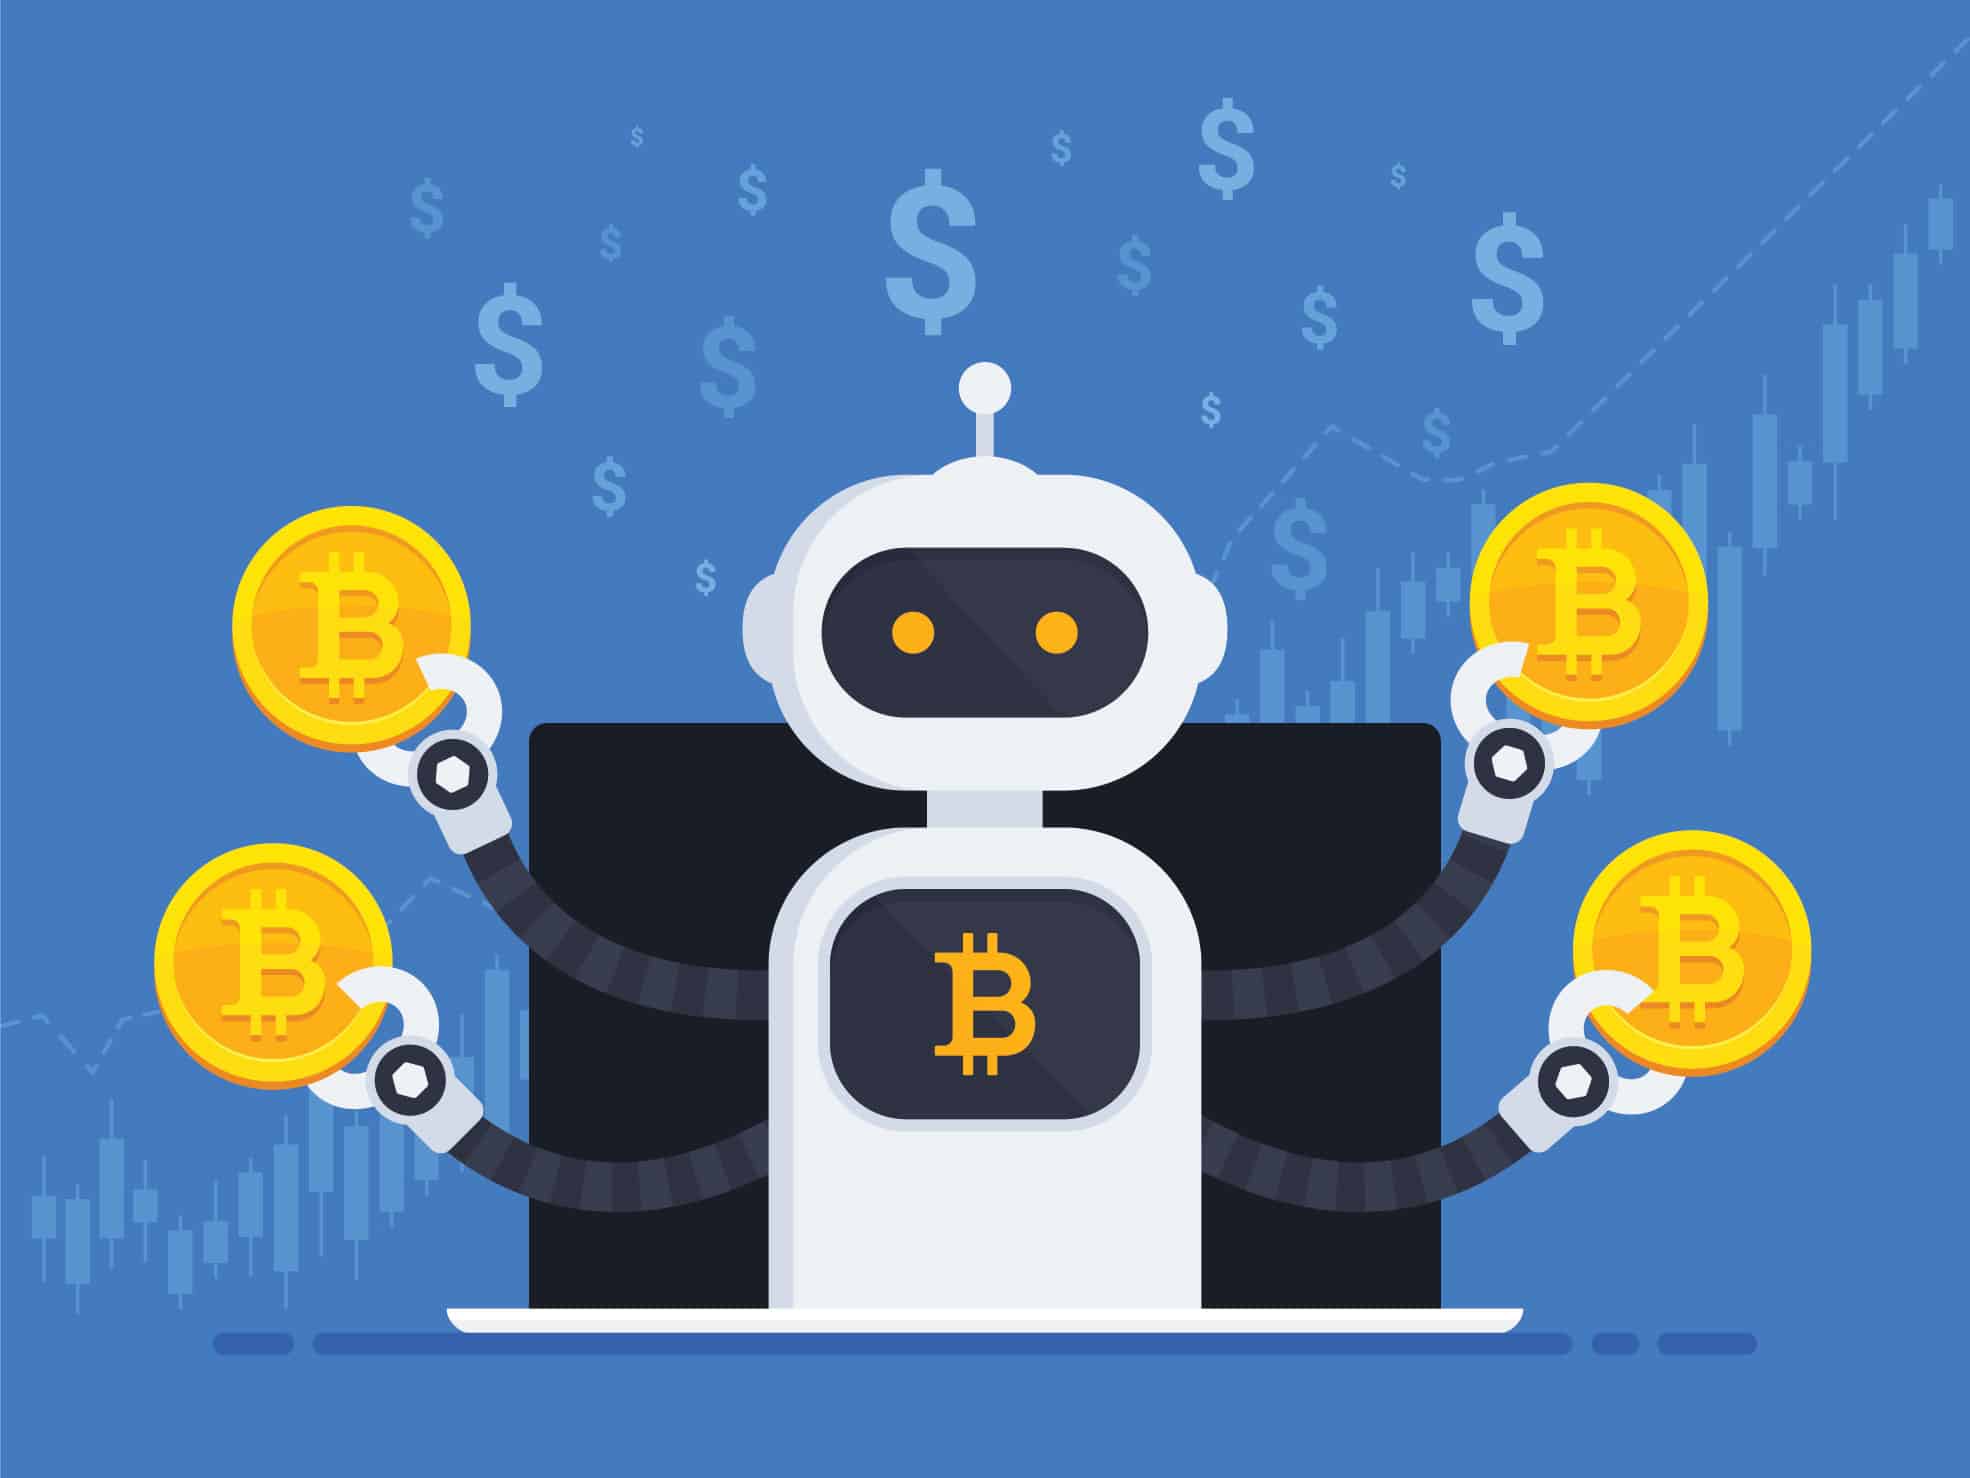 Beware of "OTP" bots that can steal all your cryptocurrency